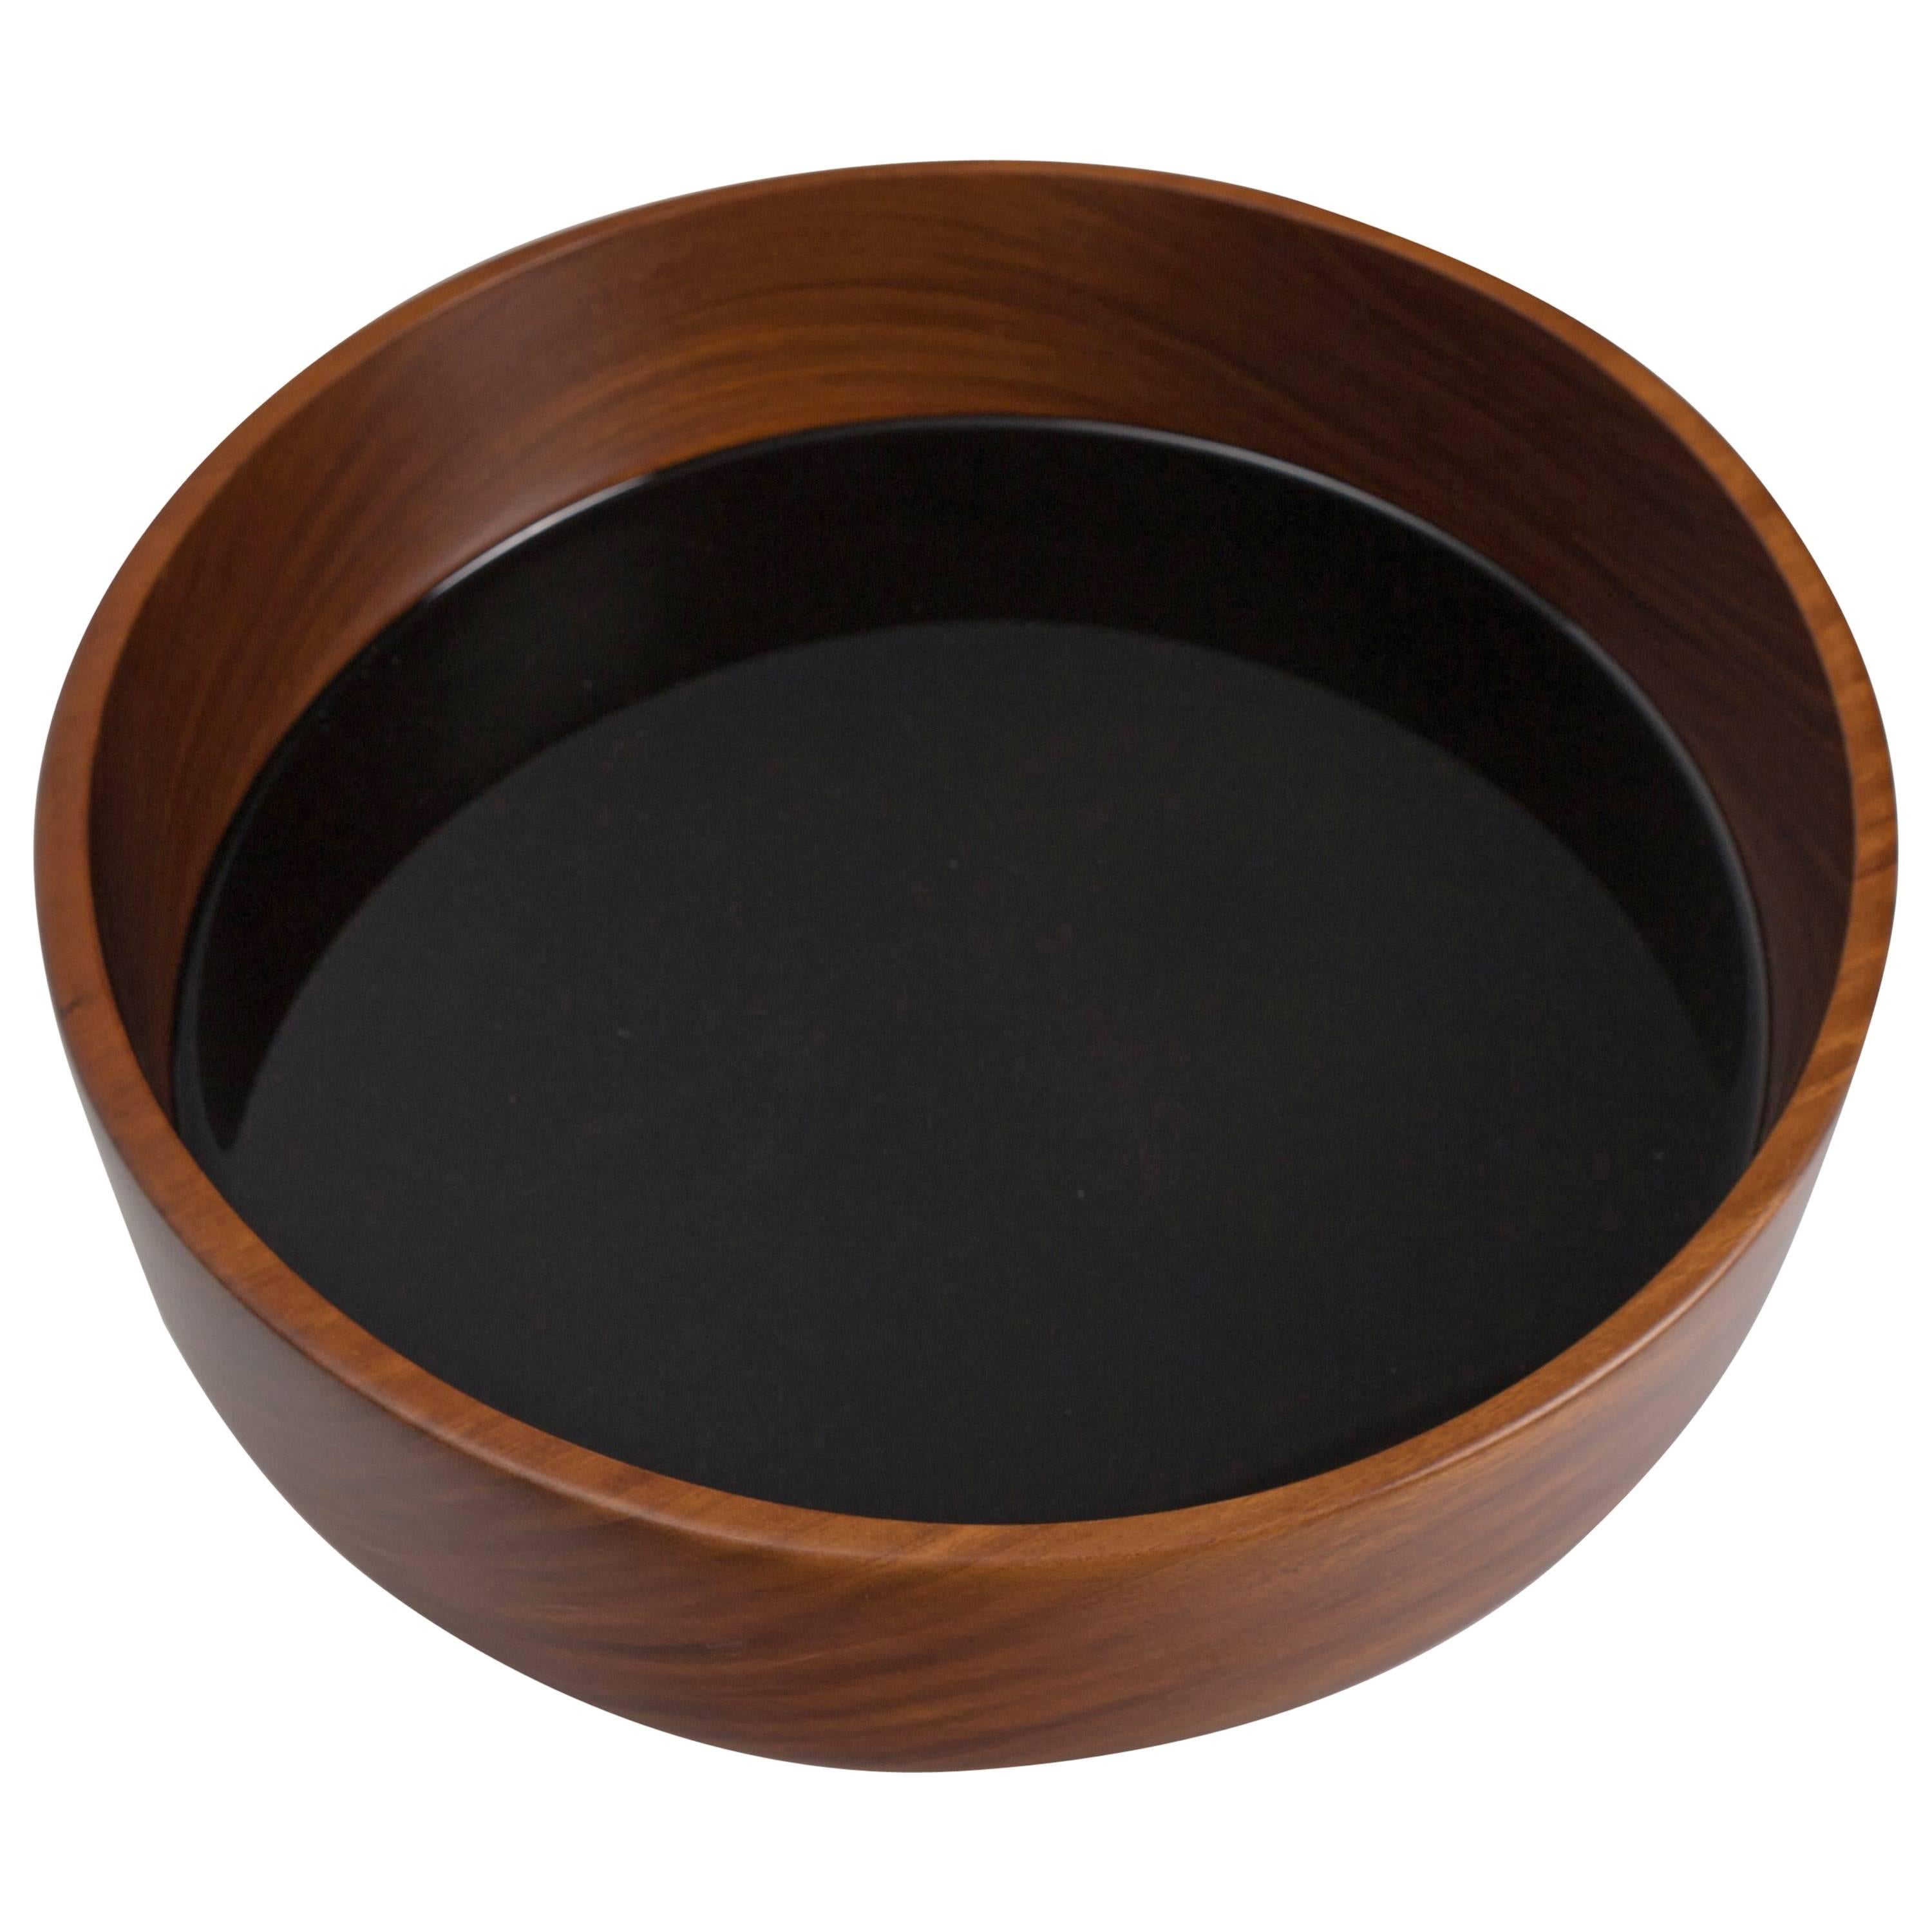 Hand-Carved Corteza Lingnum Vitae Cylindrical Bowl with Resin Bottom